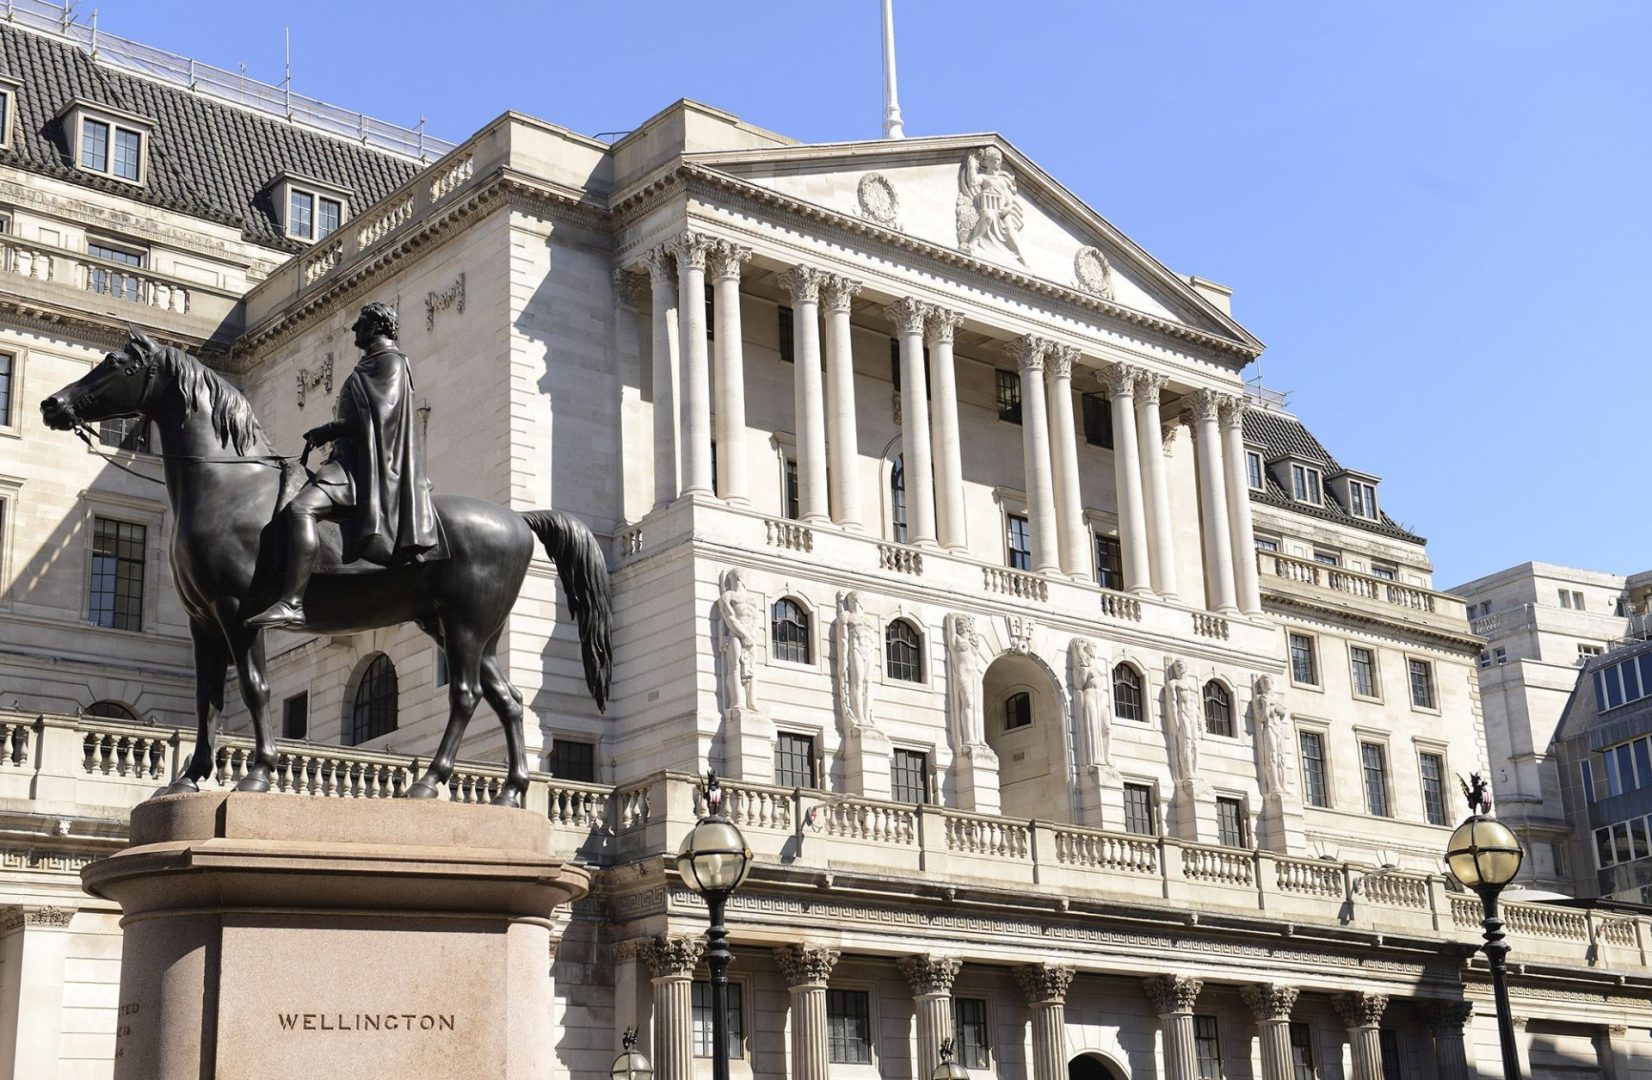 Photograph of the Bank of England